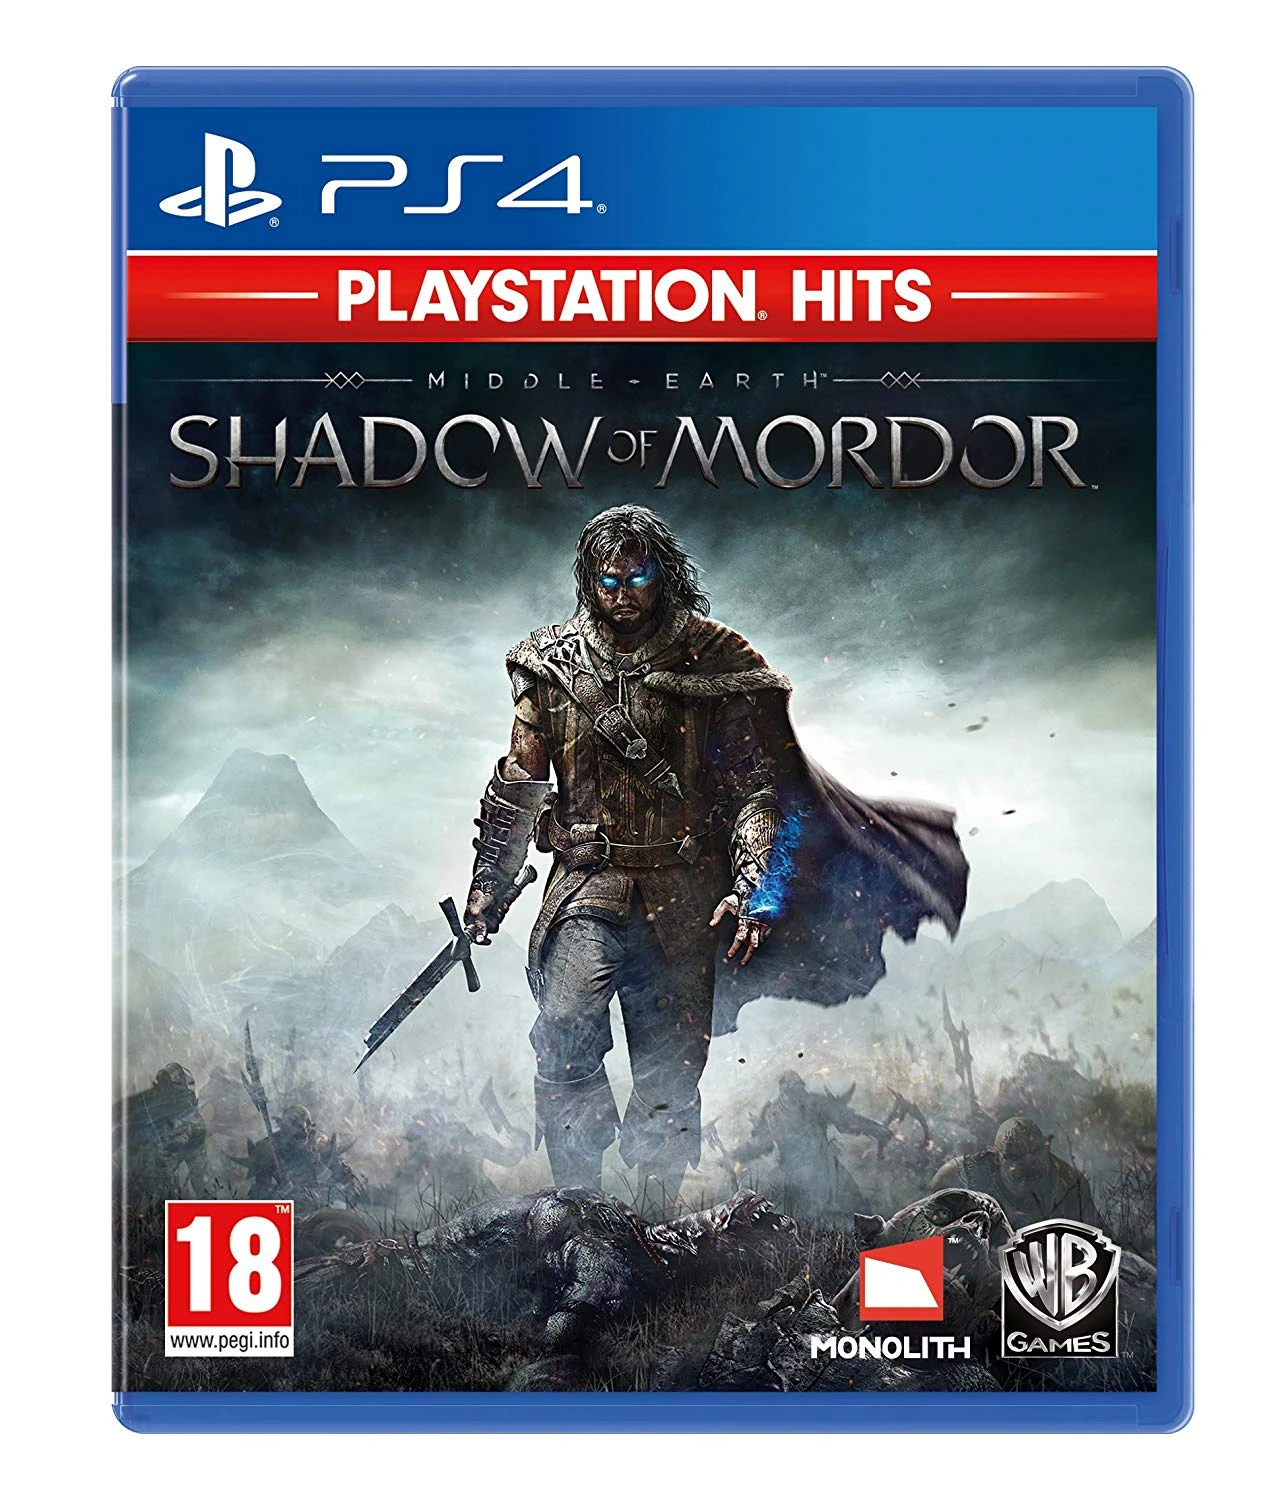 Middle-Earth: Shadow of Mordor (PlayStation Hits) (EUR)